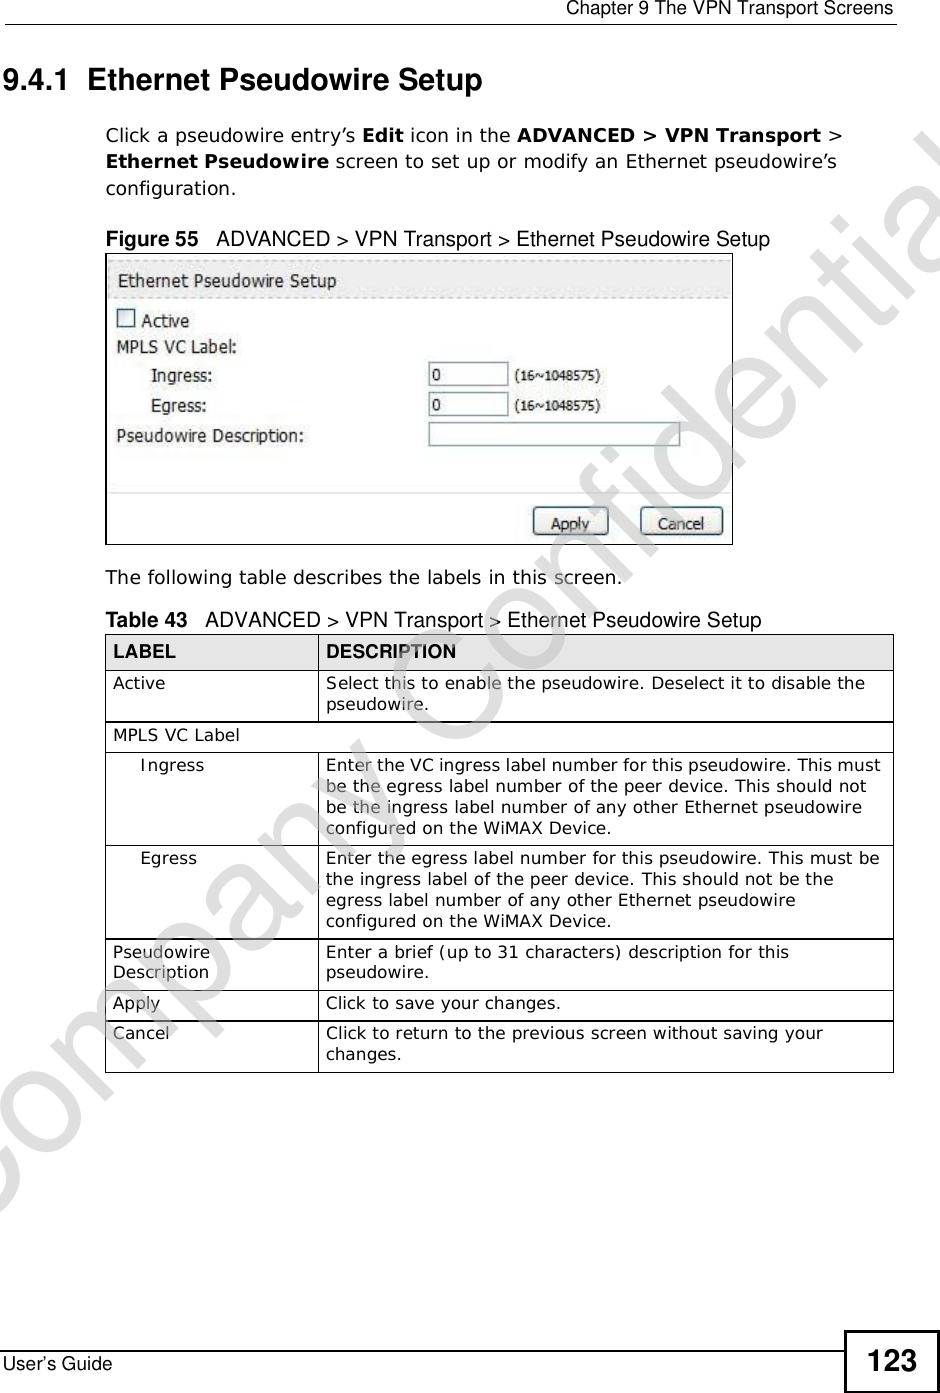  Chapter 9The VPN Transport ScreensUser’s Guide 1239.4.1  Ethernet Pseudowire SetupClick a pseudowire entry’s Edit icon in the ADVANCED &gt;VPN Transport &gt;Ethernet Pseudowire screen to set up or modify an Ethernet pseudowire’s configuration.Figure 55   ADVANCED &gt; VPN Transport &gt; Ethernet Pseudowire Setup  The following table describes the labels in this screen.Table 43   ADVANCED &gt; VPN Transport &gt; Ethernet Pseudowire SetupLABEL DESCRIPTIONActiveSelect this to enable the pseudowire. Deselect it to disable the pseudowire.MPLS VC LabelIngressEnter the VC ingress label number for this pseudowire. This must be the egress label number of the peer device. This should not be the ingress label number of any other Ethernet pseudowire configured on the WiMAX Device.EgressEnter the egress label number for this pseudowire. This must be the ingress label of the peer device. This should not be the egress label number of any other Ethernet pseudowire configured on the WiMAX Device.PseudowireDescription Enter a brief (up to 31 characters) description for this pseudowire.ApplyClick to save your changes.CancelClick to return to the previous screen without saving your changes.Company Confidential